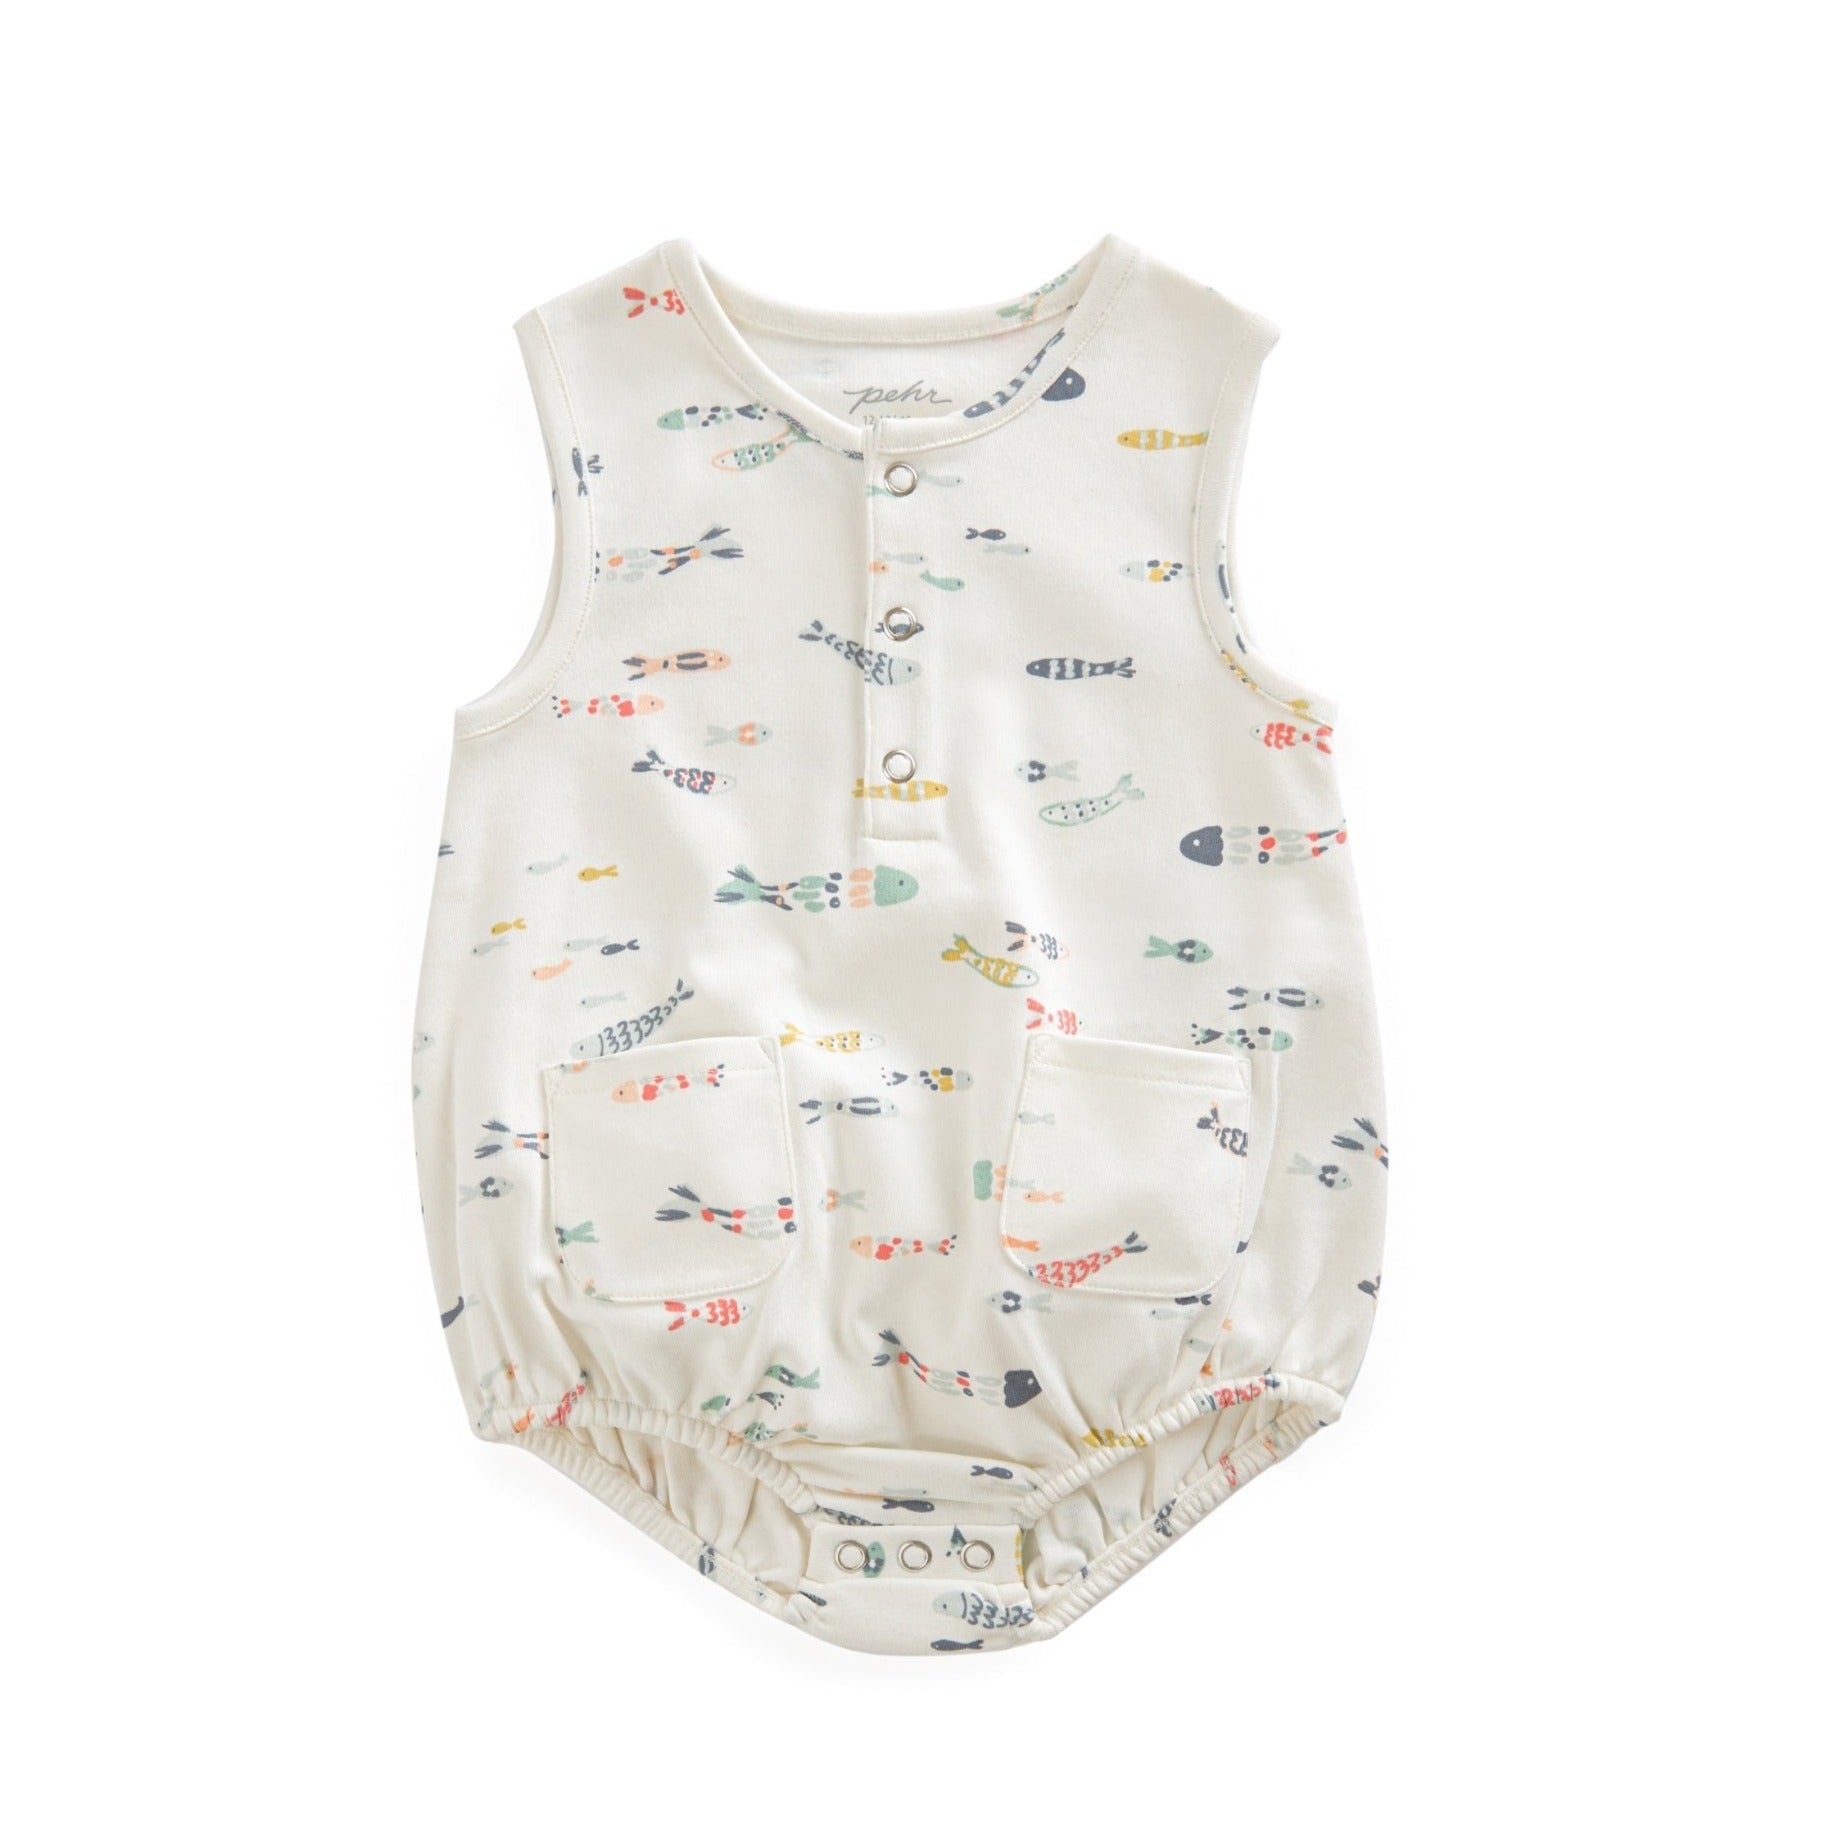 pehr saltwater one piece sleeveless baby clothes